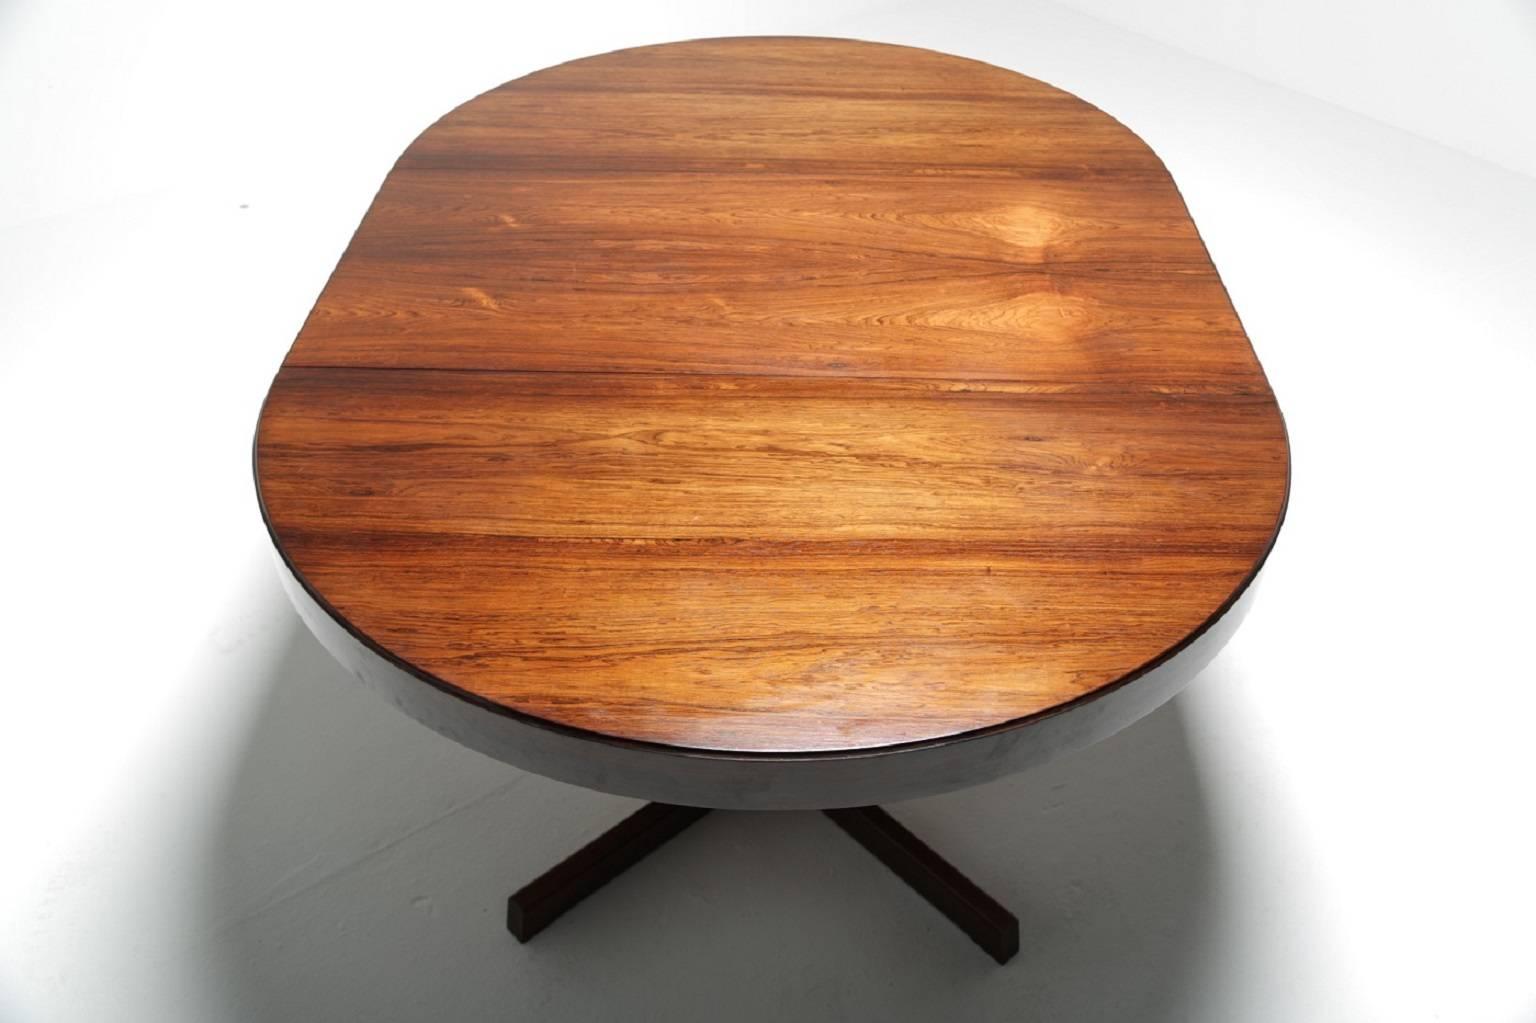 This vintage Danish tropical hardwood extending pedestal table is a rare and beautiful thing. Attributed to the great Danish designer Kai Kristiansen, it does indeed have all the hallmarks of a Kristiansen creation. Expertly made from stunning